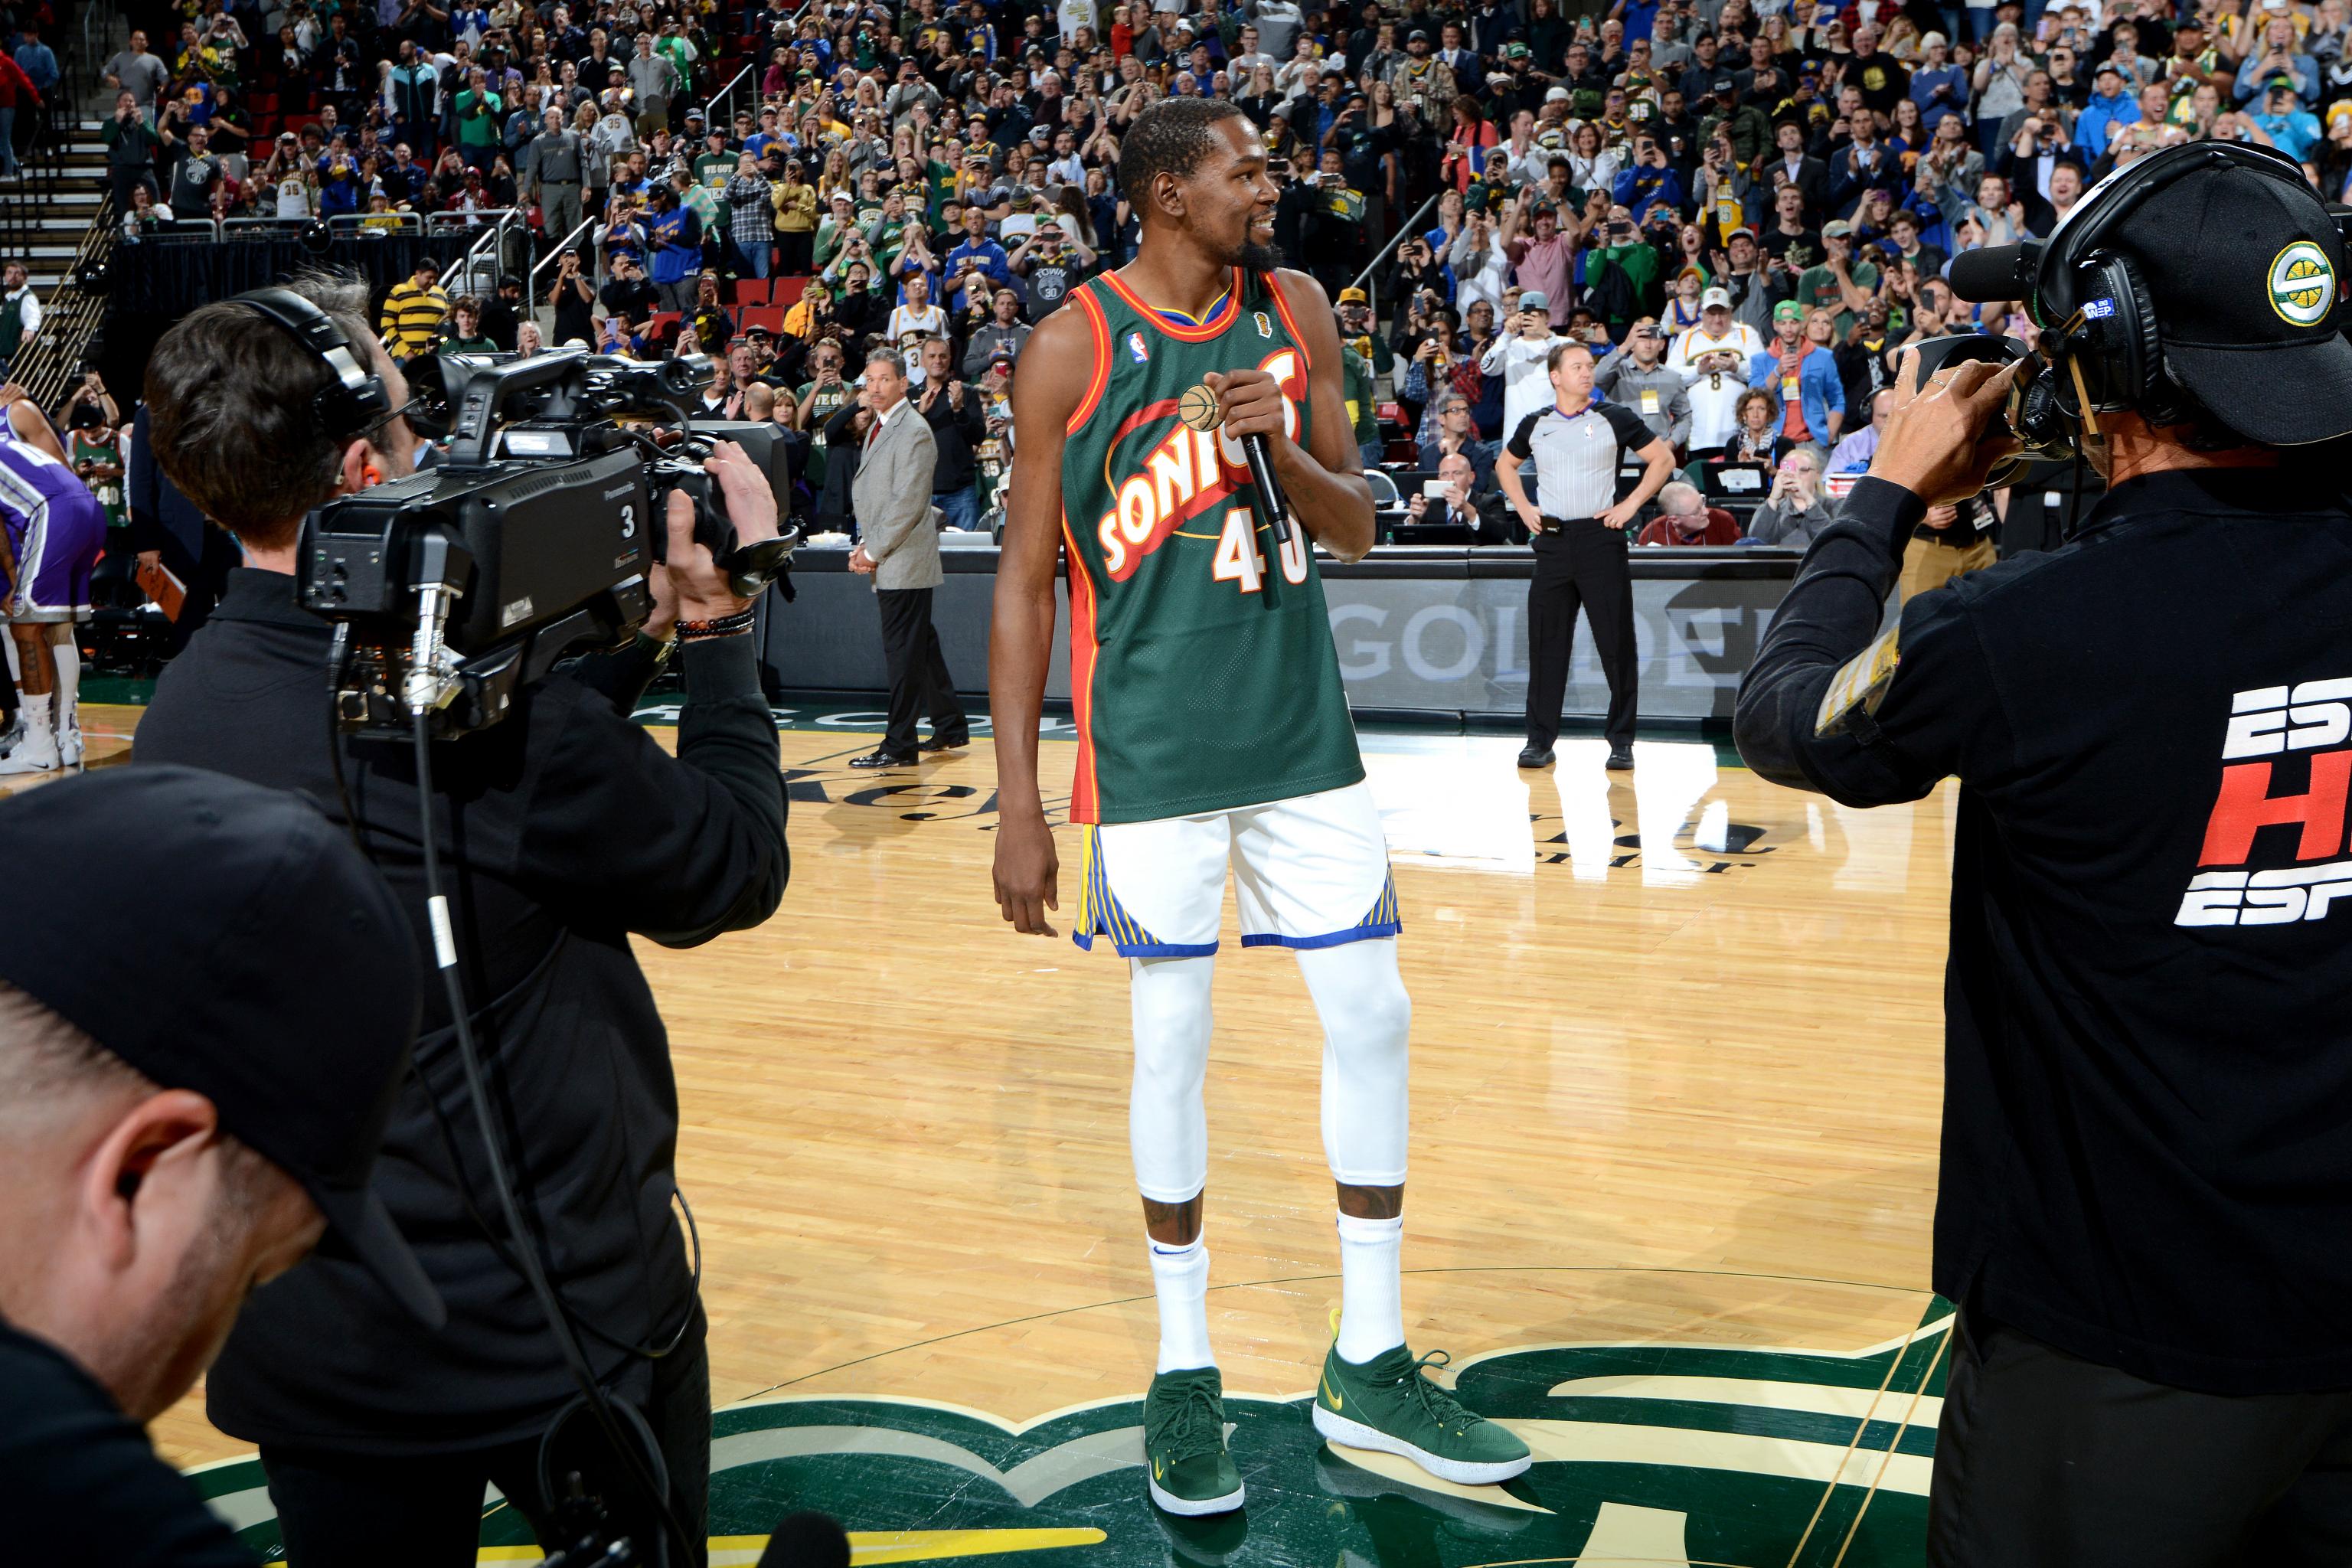 Steve Noah on X: Recreating the arena for the Seattle Supersonics